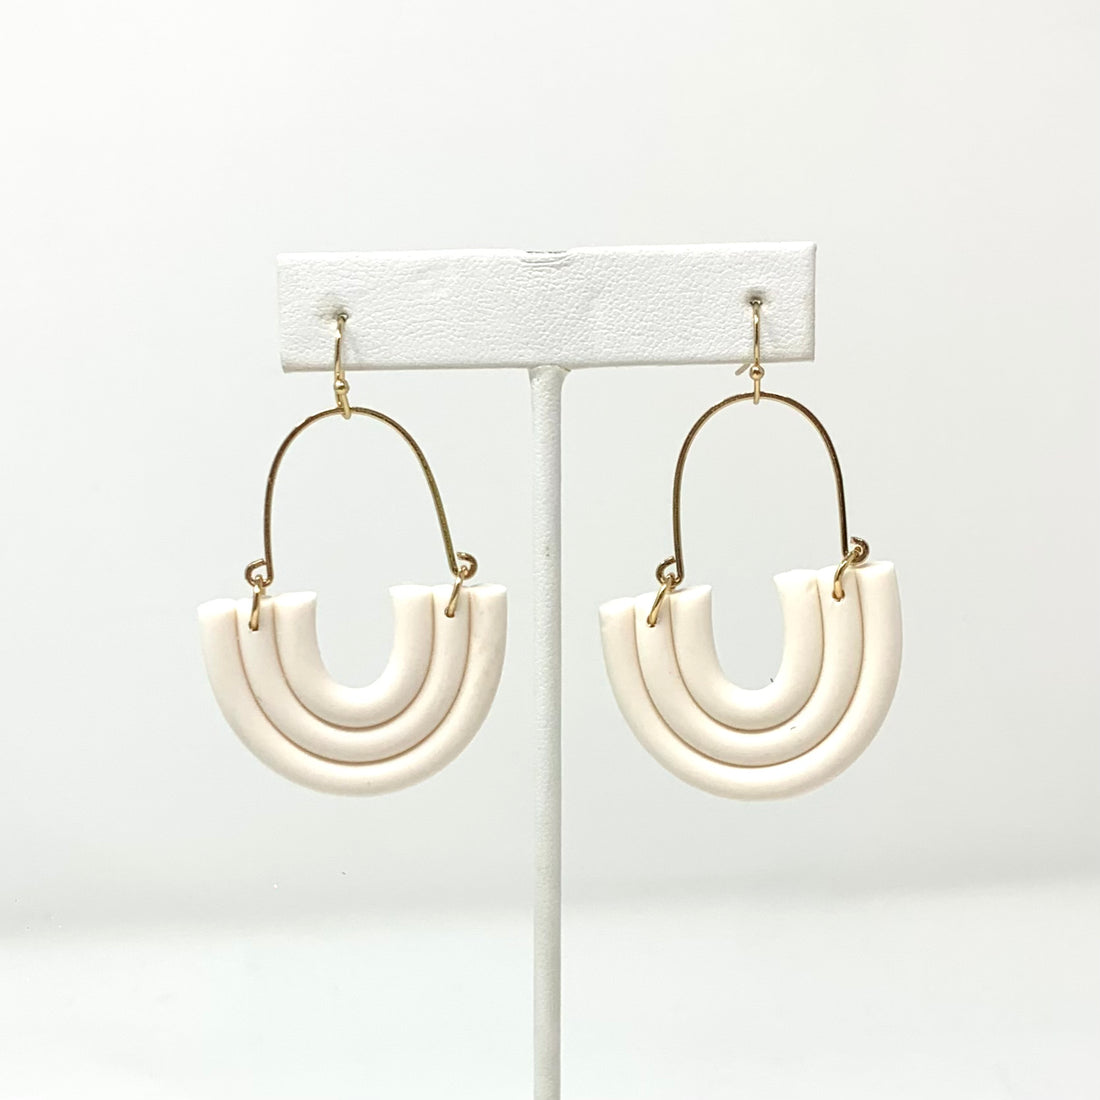 Evelyn Earrings in Gold with White